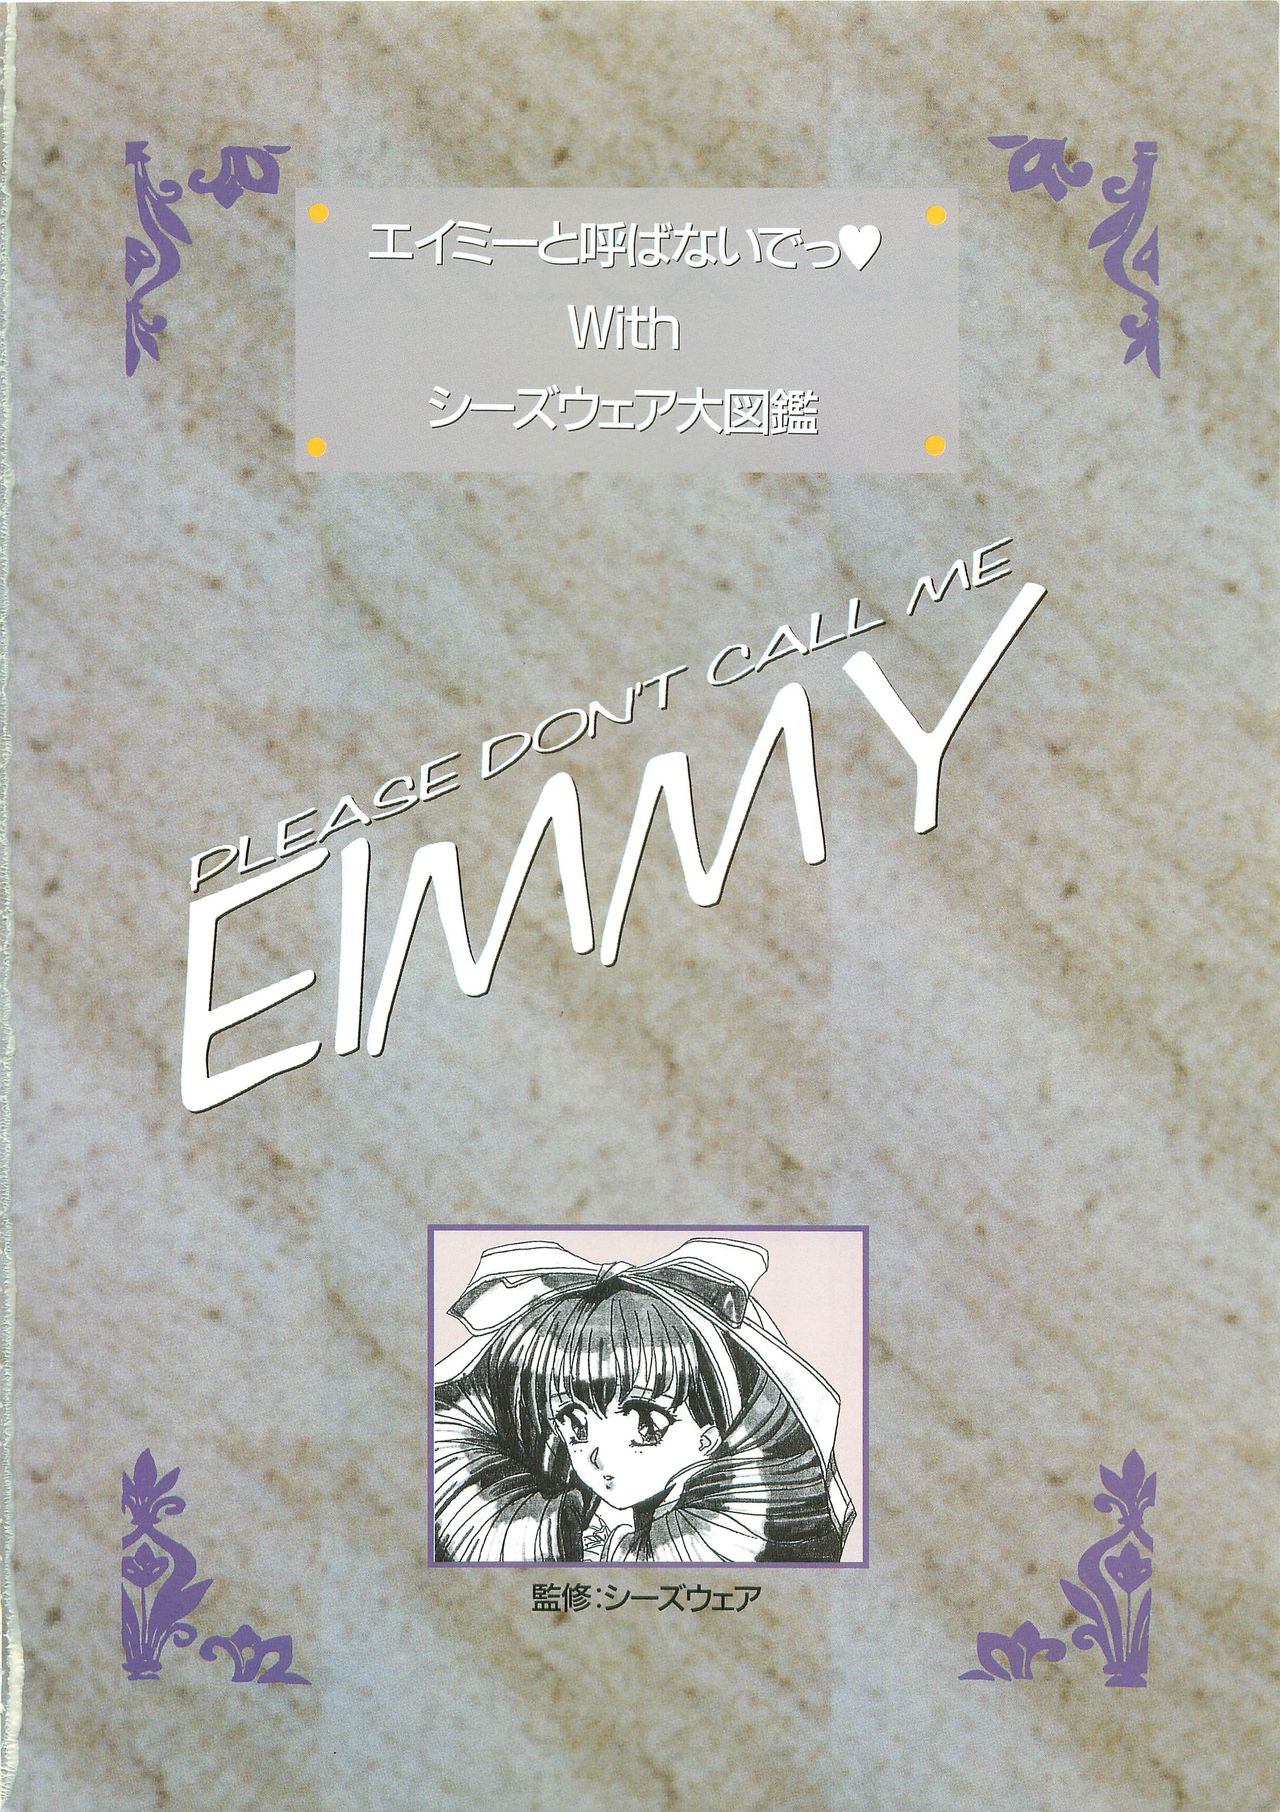 Please Don't Call me Eimmy with C's Ware encyclopedia (Eichi Mook) エイミーと呼ばないでっwithシーズウェア大図鑑 （ＥＩＣＨＩ　ＭＯＯＫ）